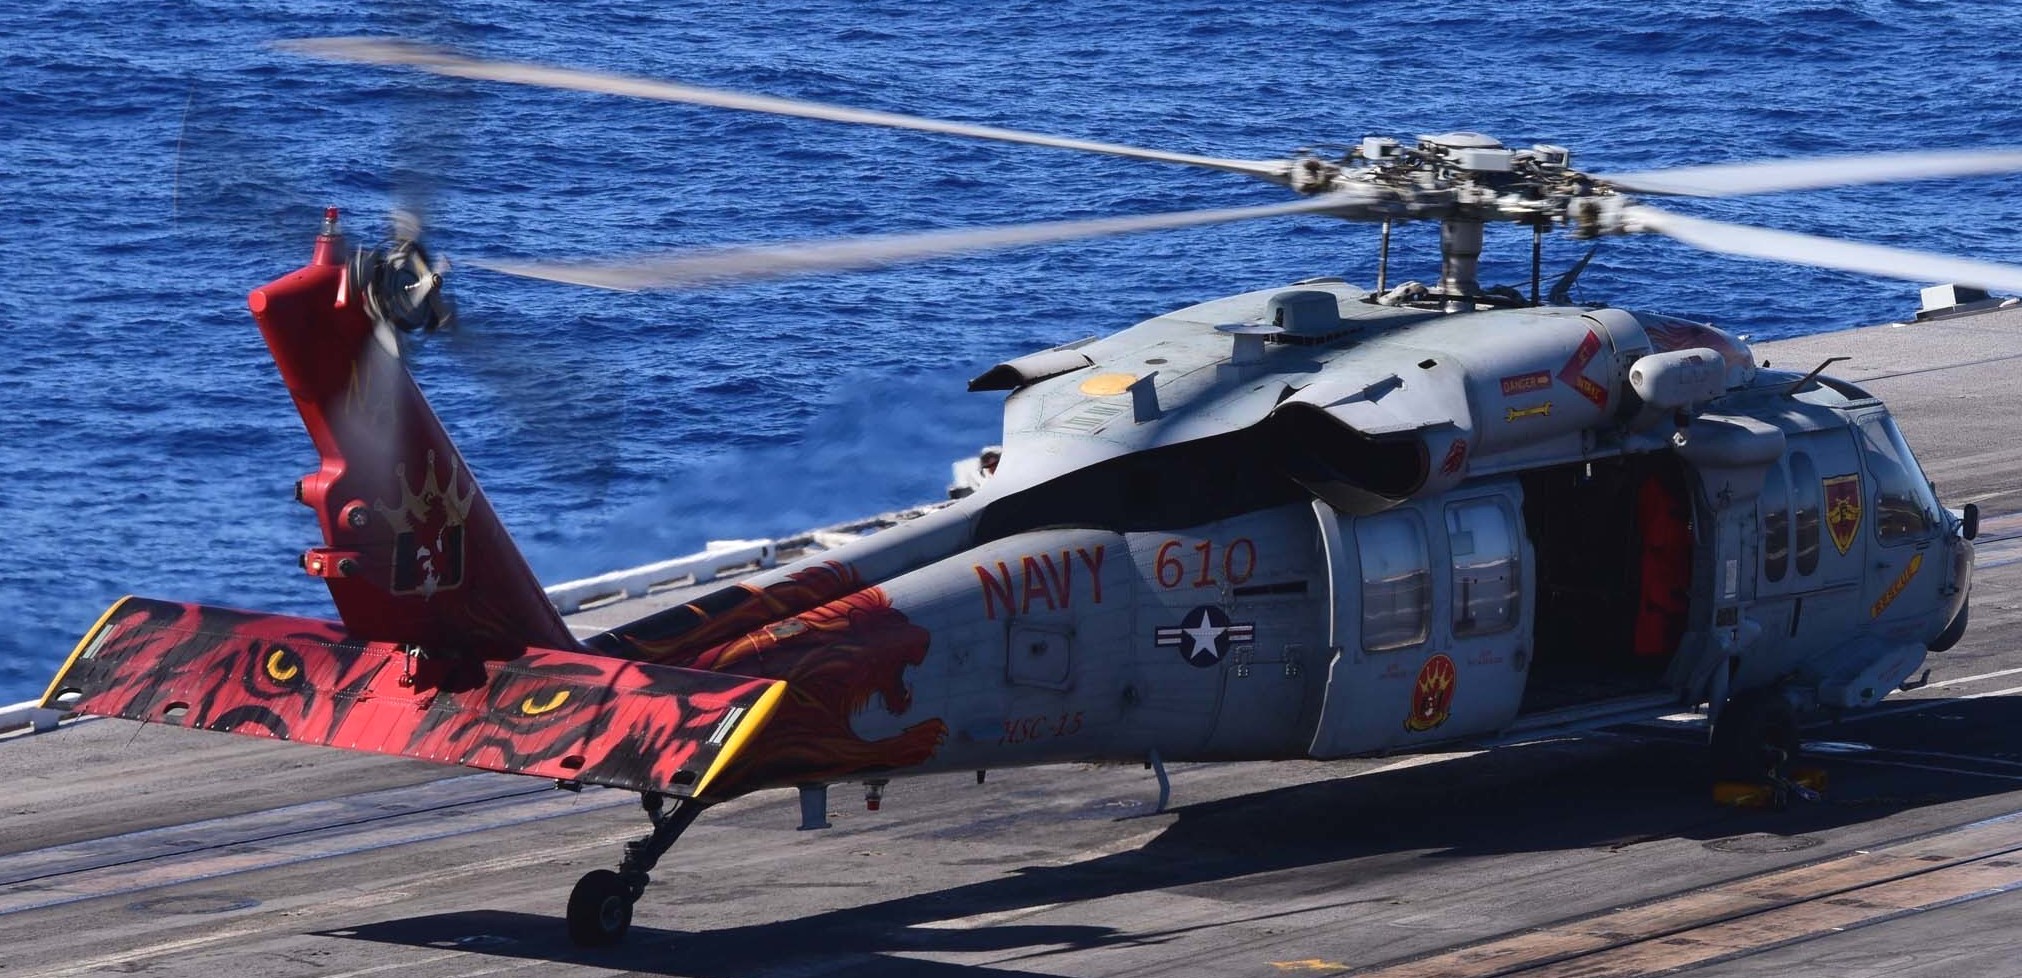 hsc-15 red lions helicopter sea combat squadron us navy mh-60s seahawk cvw-17 uss theodore roosevelt cvn-71 99